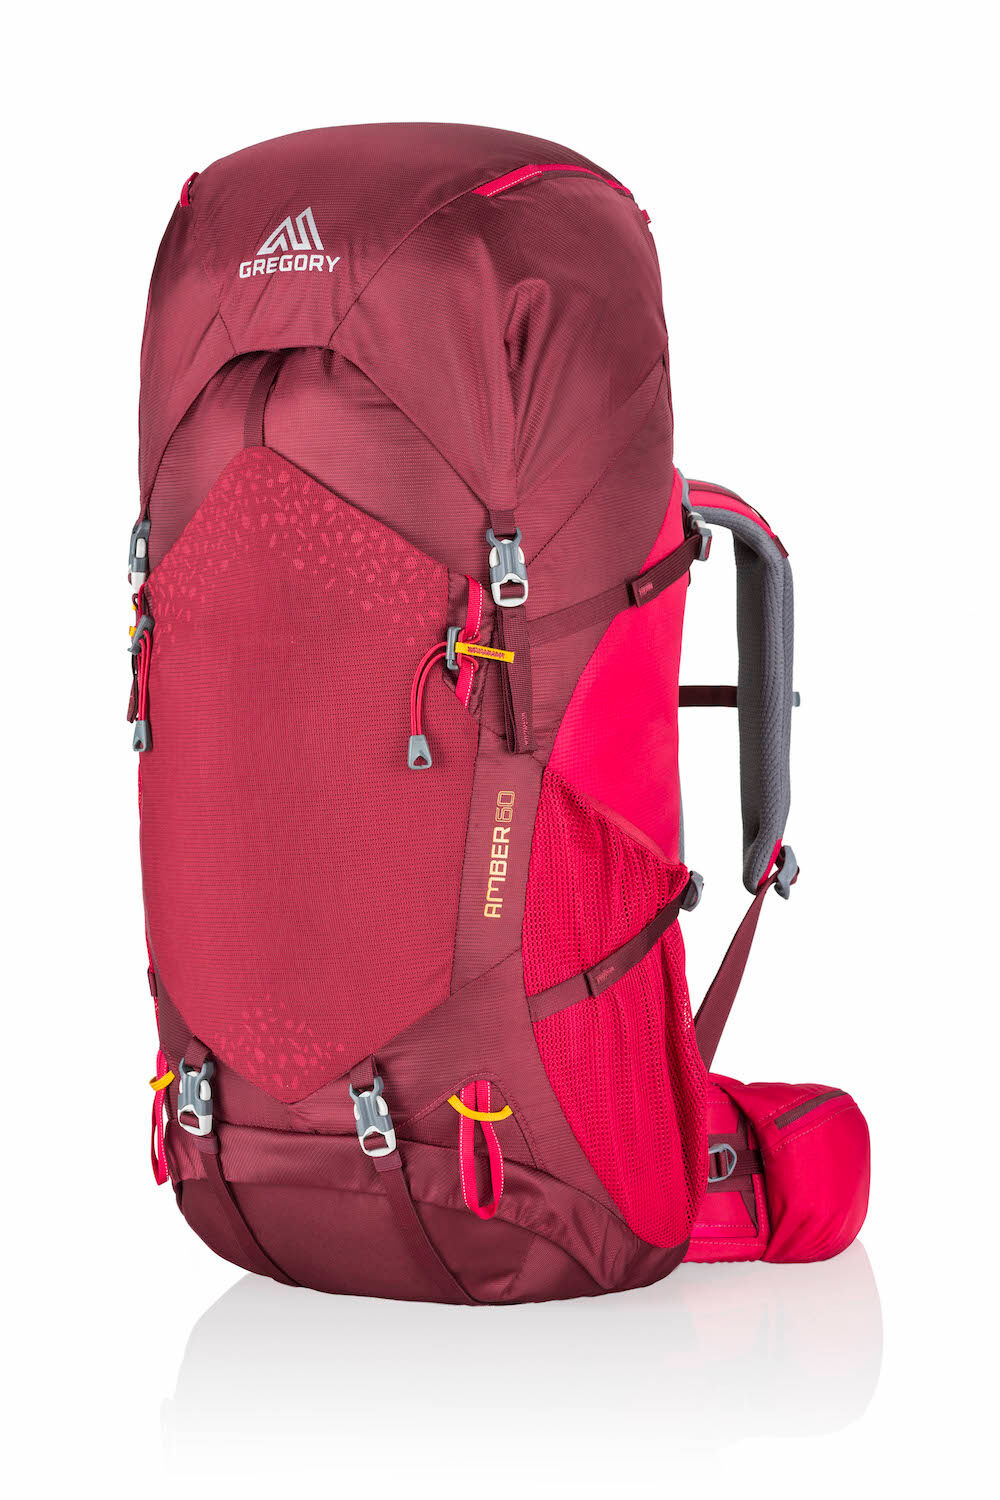 Gregory Amber 60 - Hiking backpack - Women's